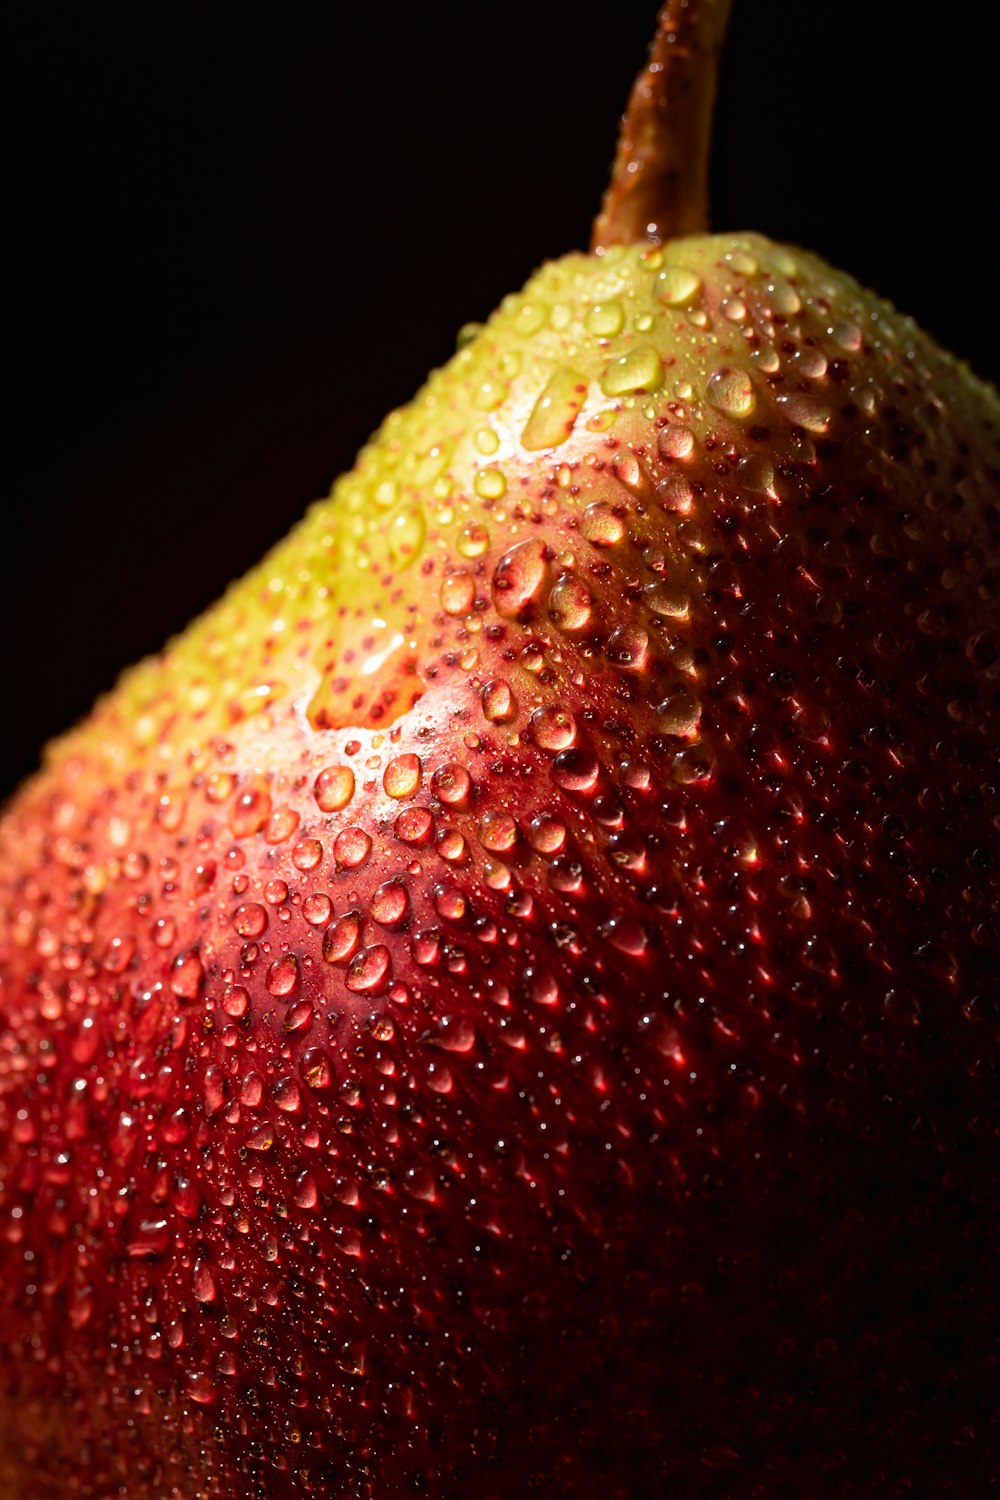 a close up of a red apple with drops of water on it